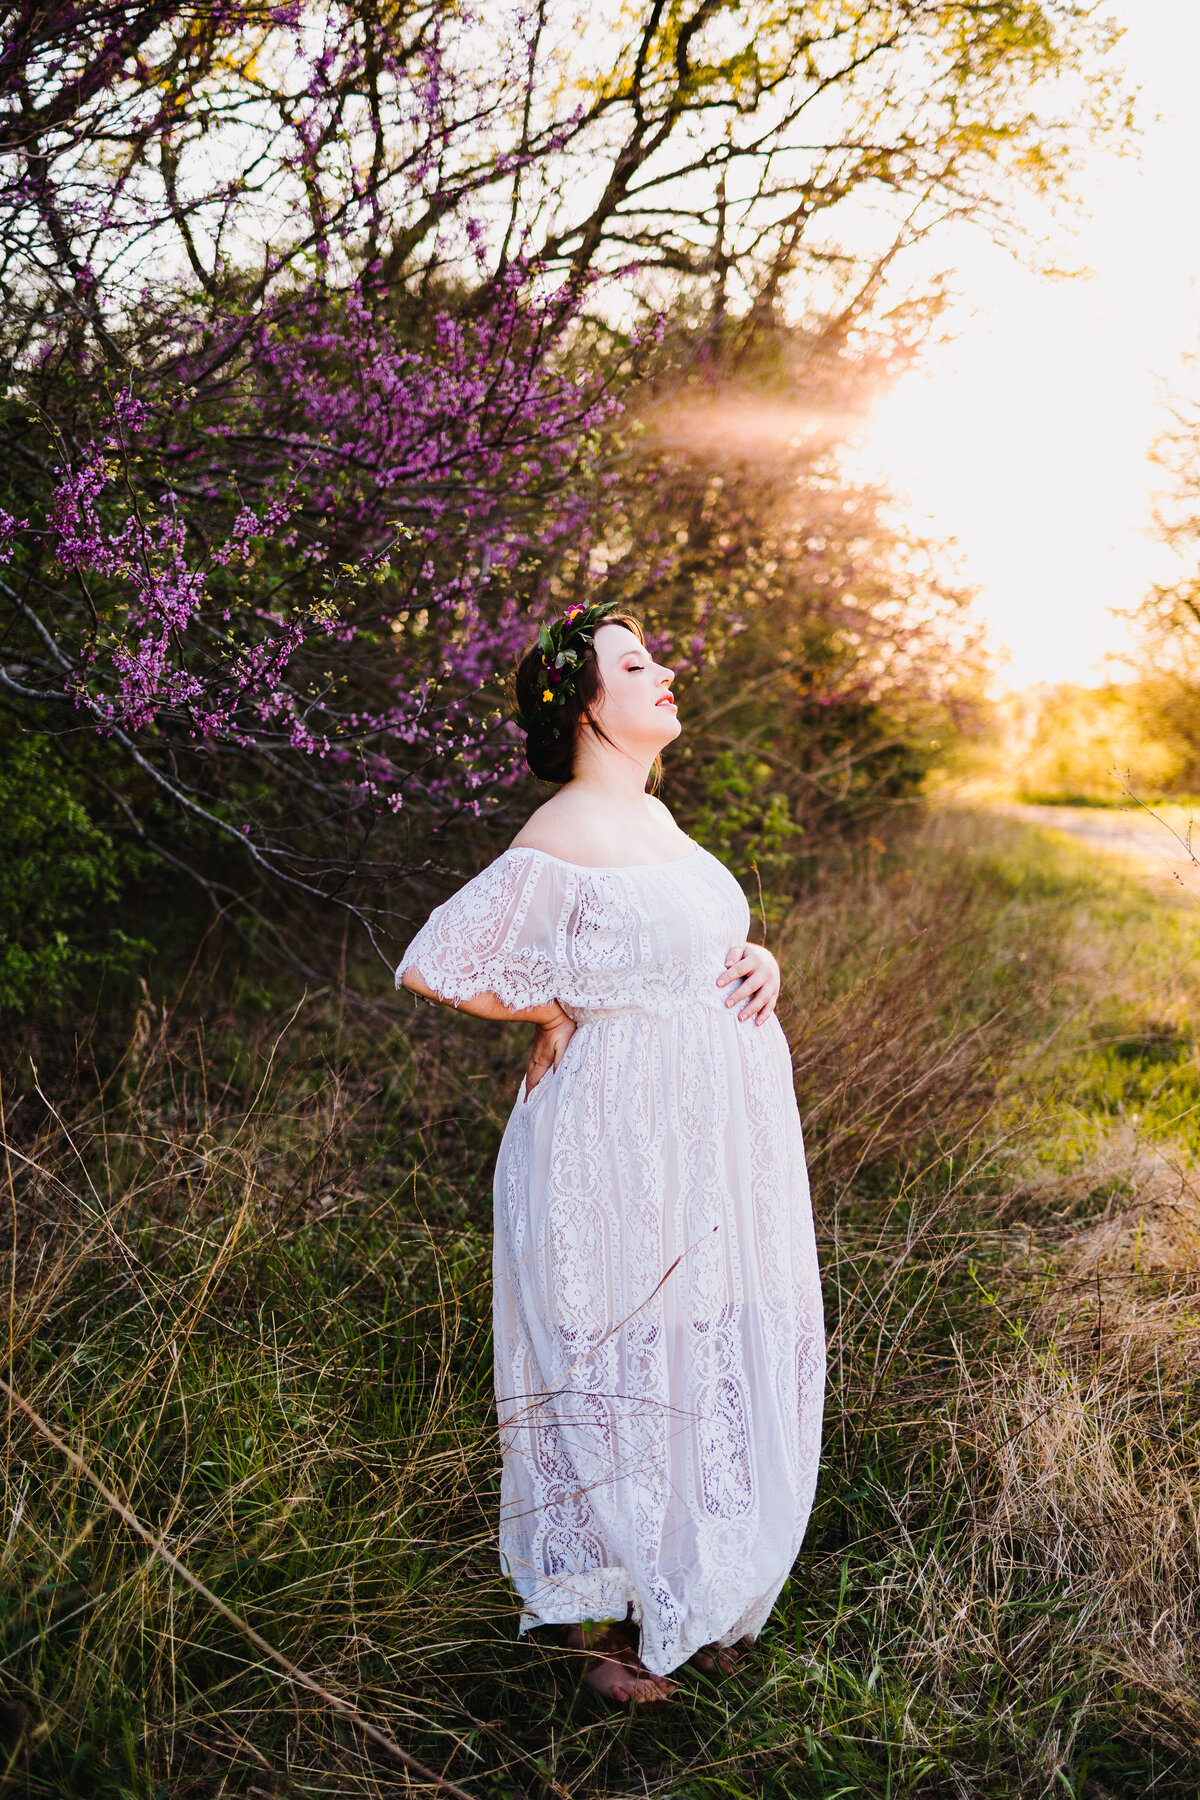 Photo of a pregnant woman in a garden with purple flowers. The woman has a long white dress and a flower headband with different colors